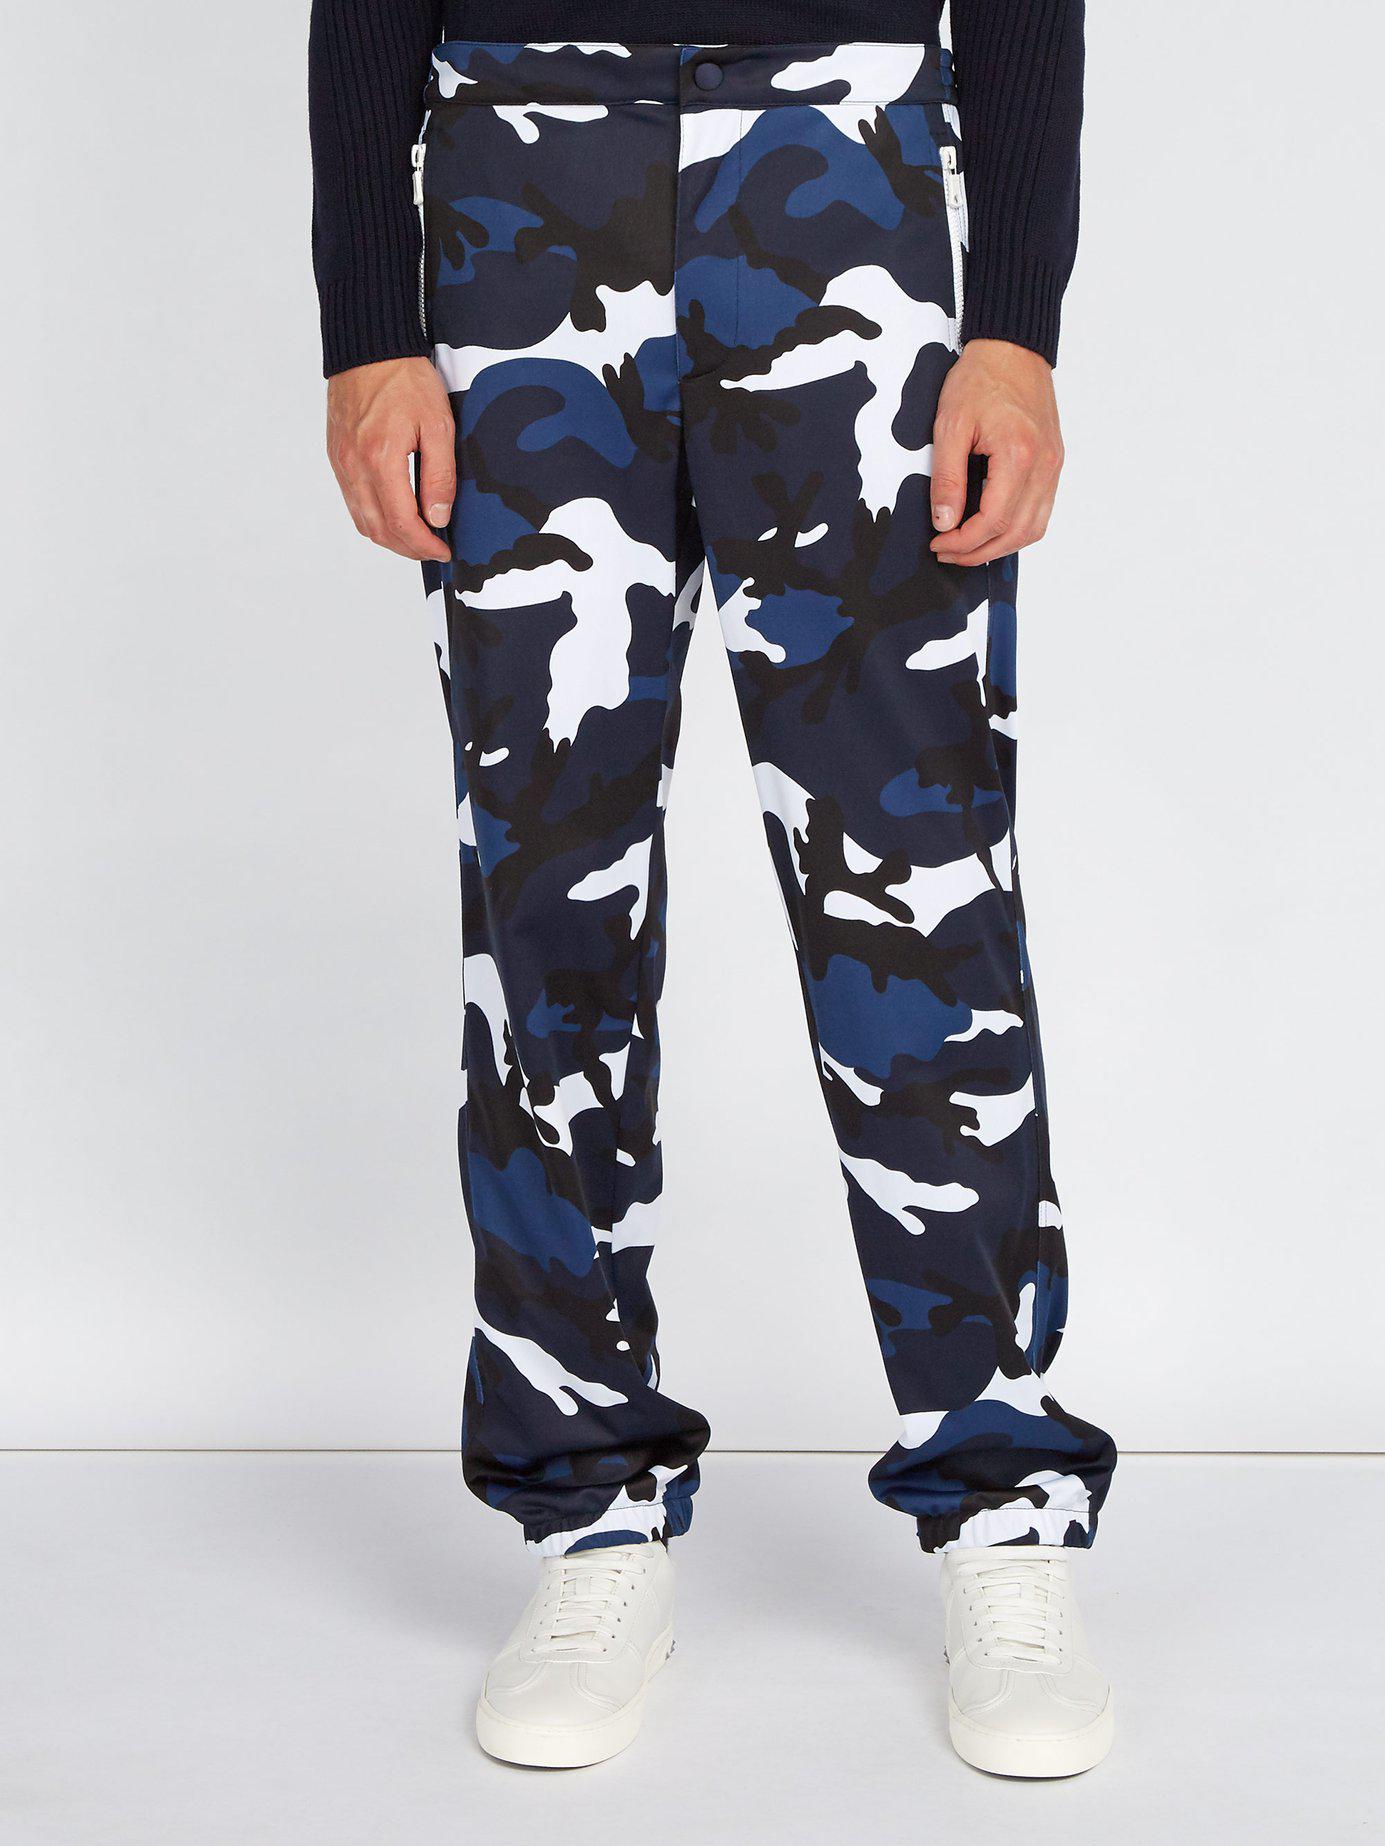 Valentino Camouflage Track Pants in Blue for Men - Lyst